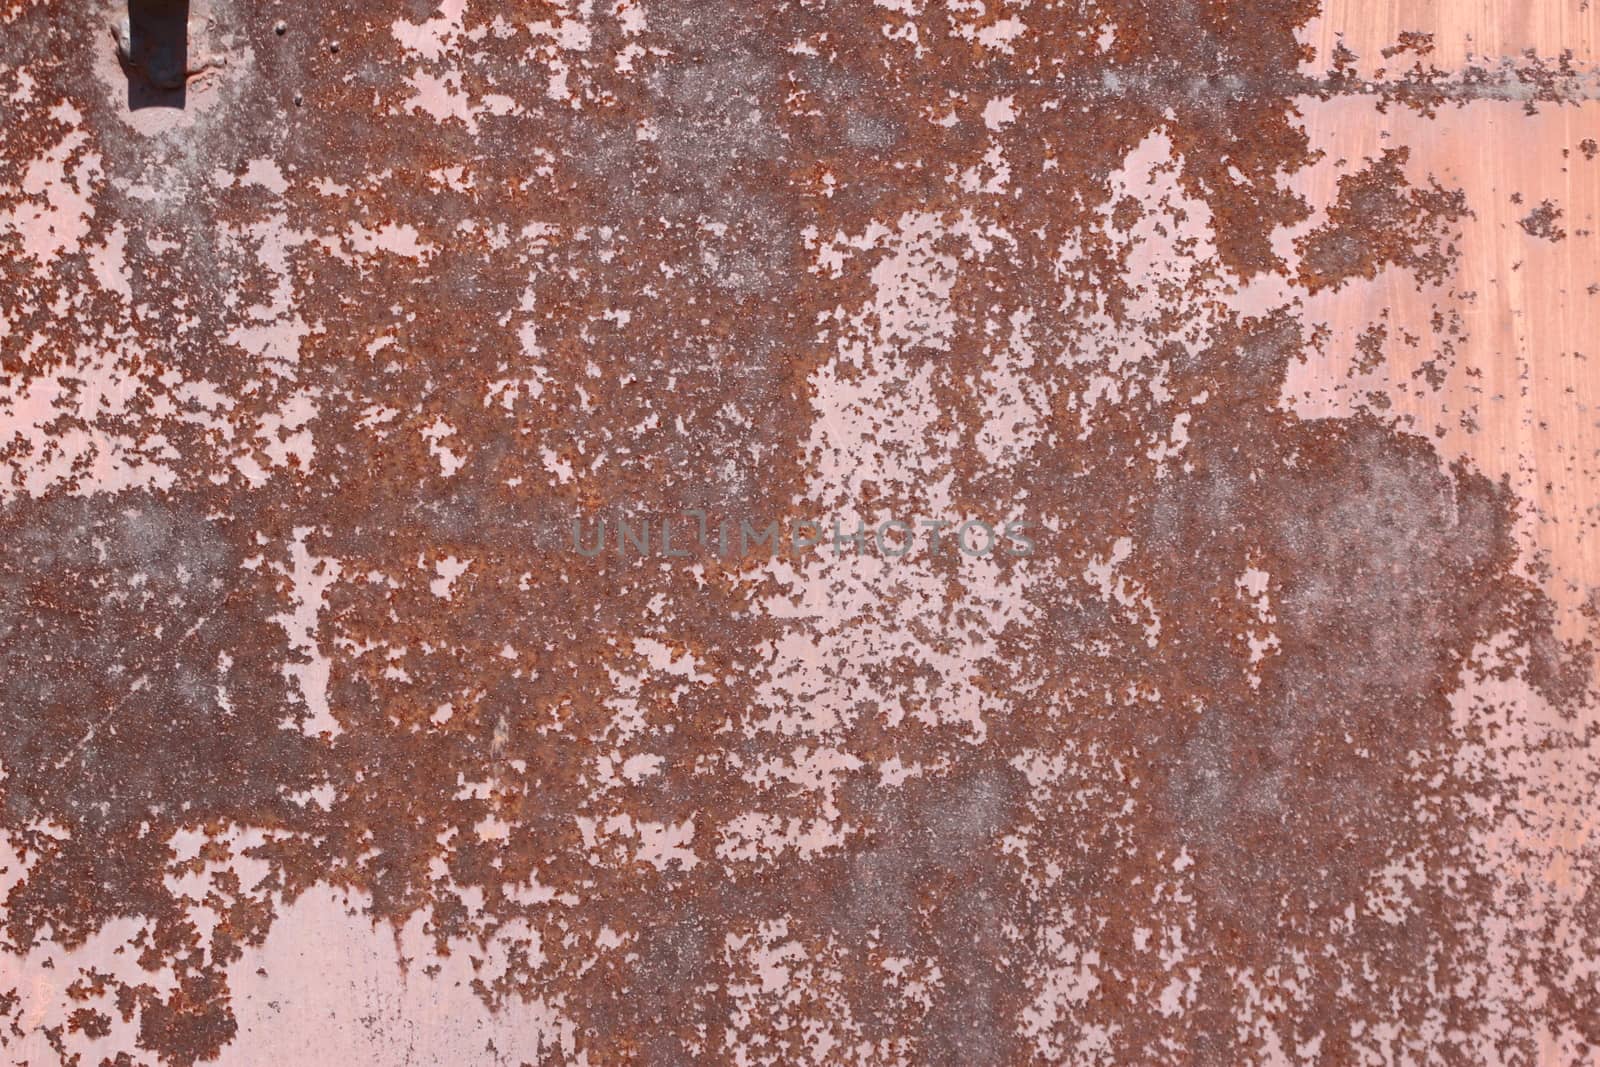 metal rusty surface with peeling  paint to use as background